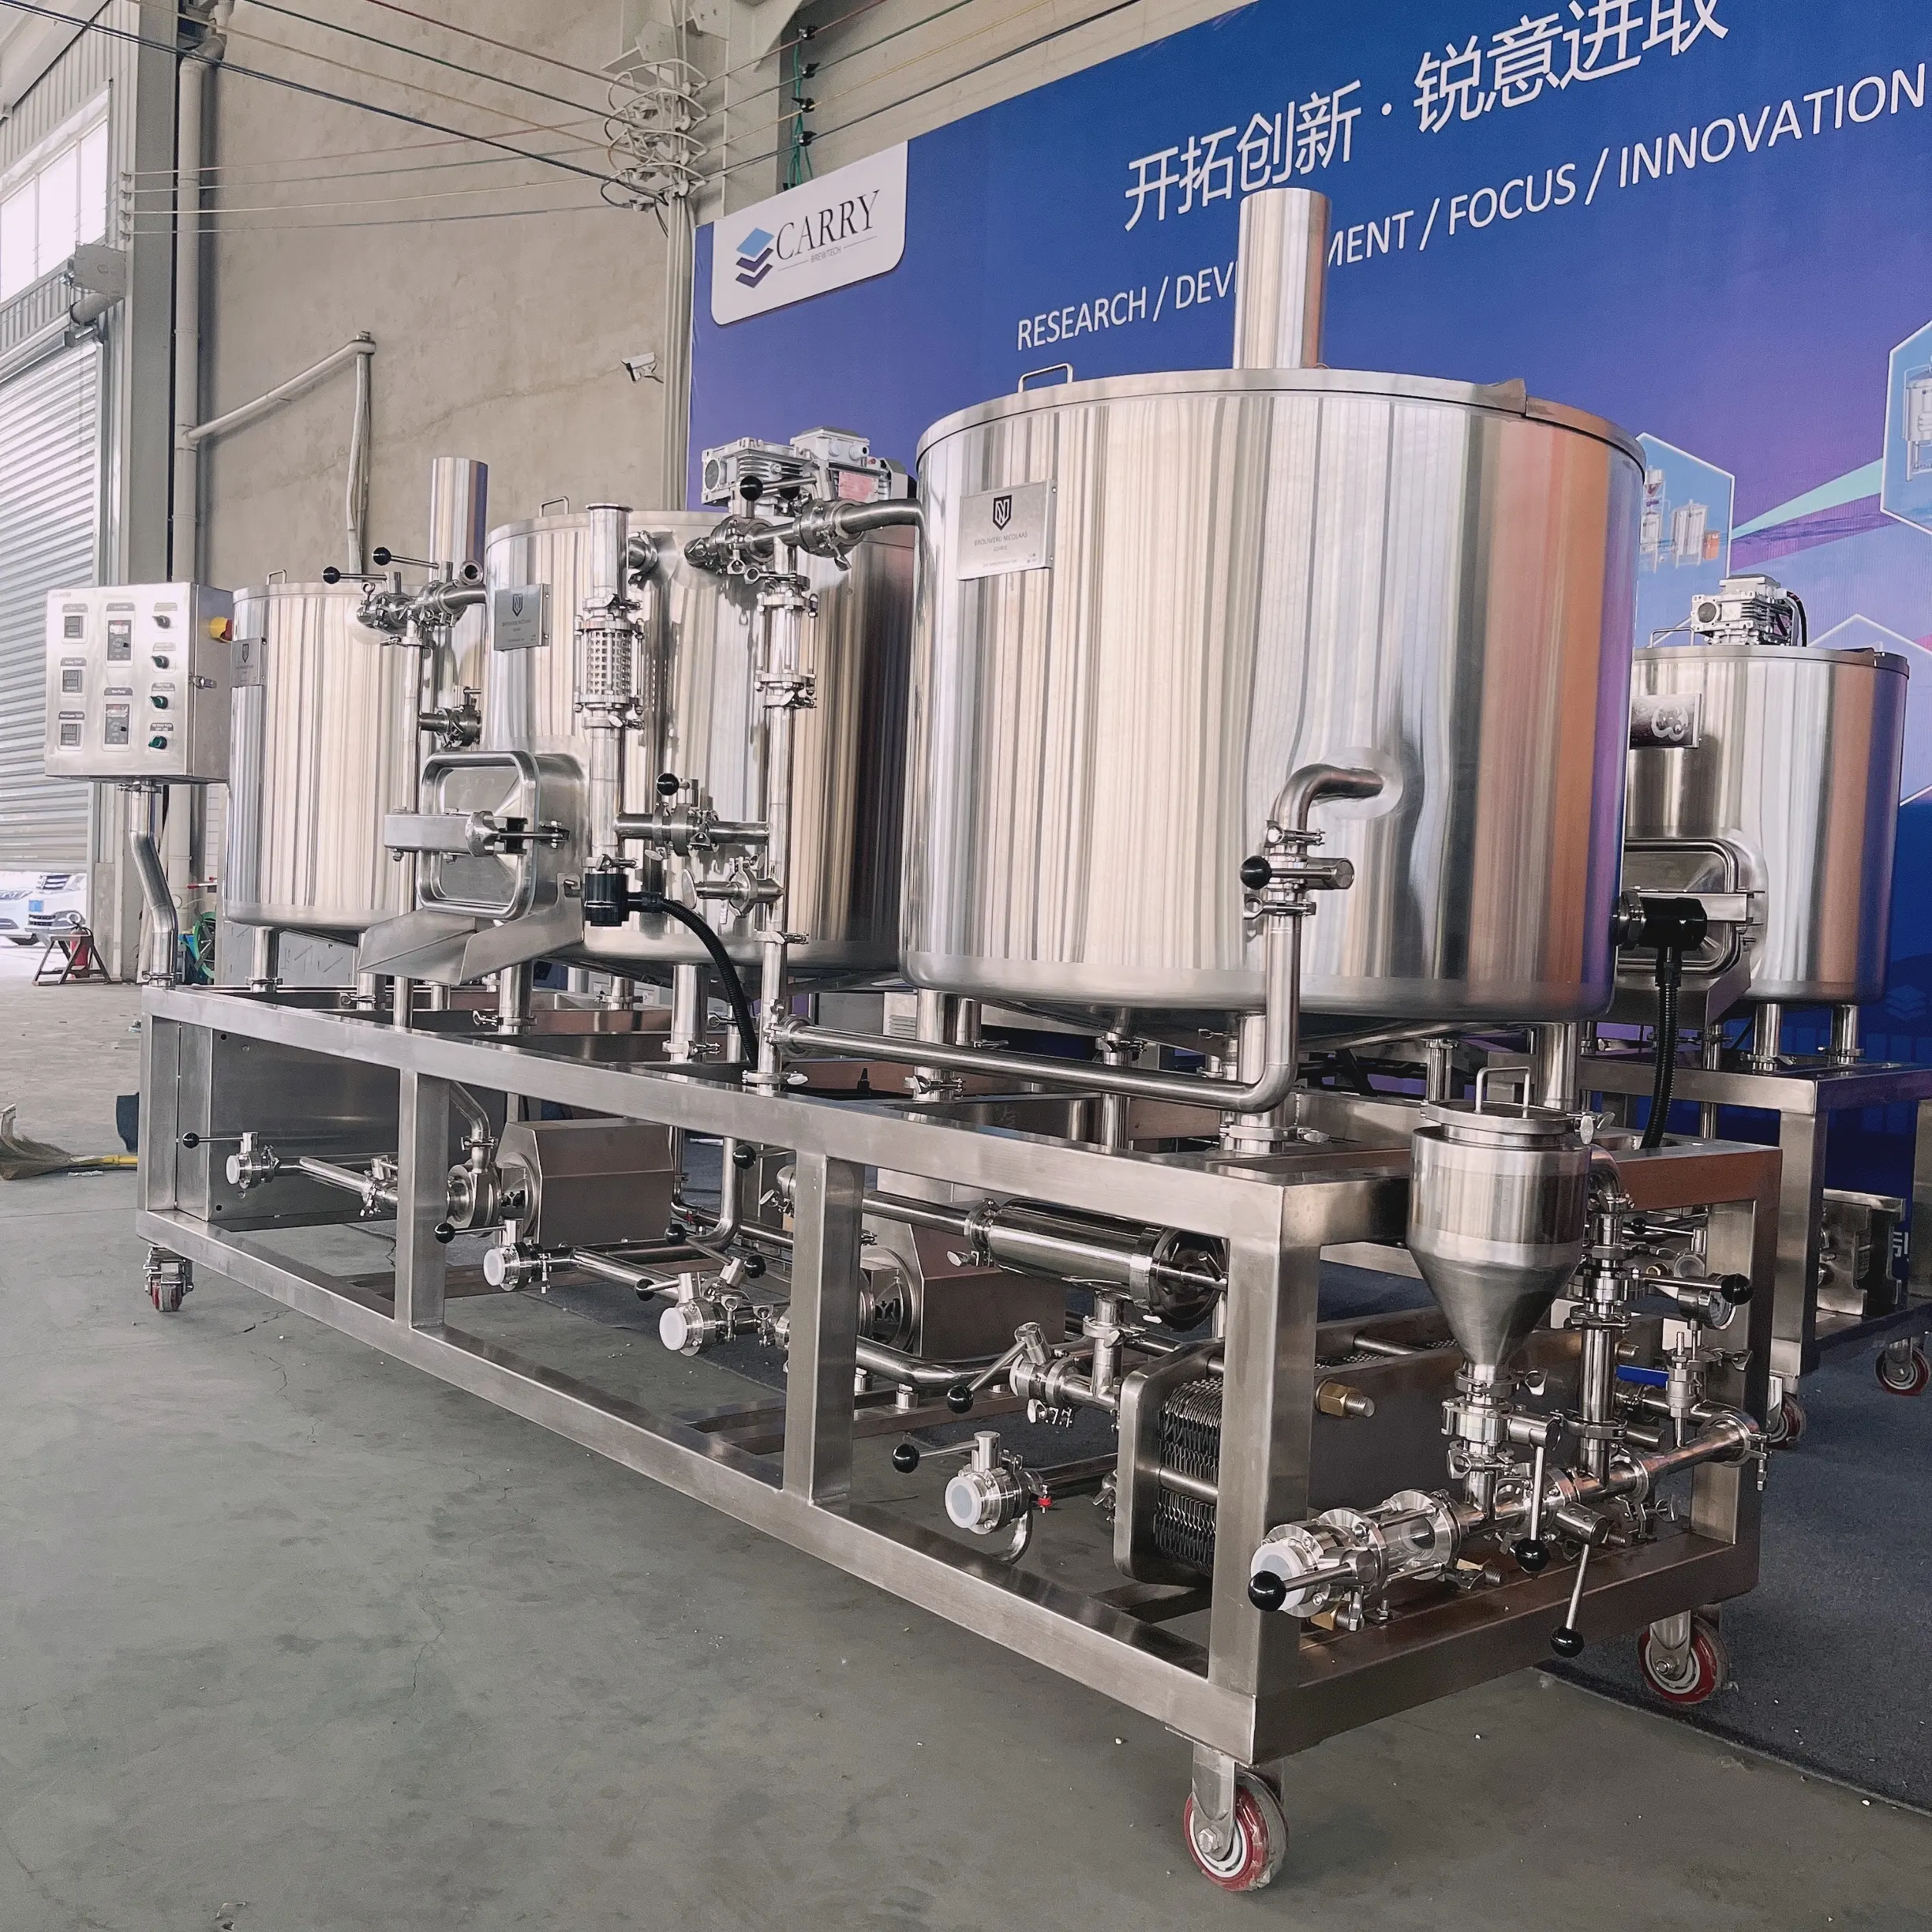 200L 500L Brewing Equipment Stainless Steel Brewing Beer Equipment